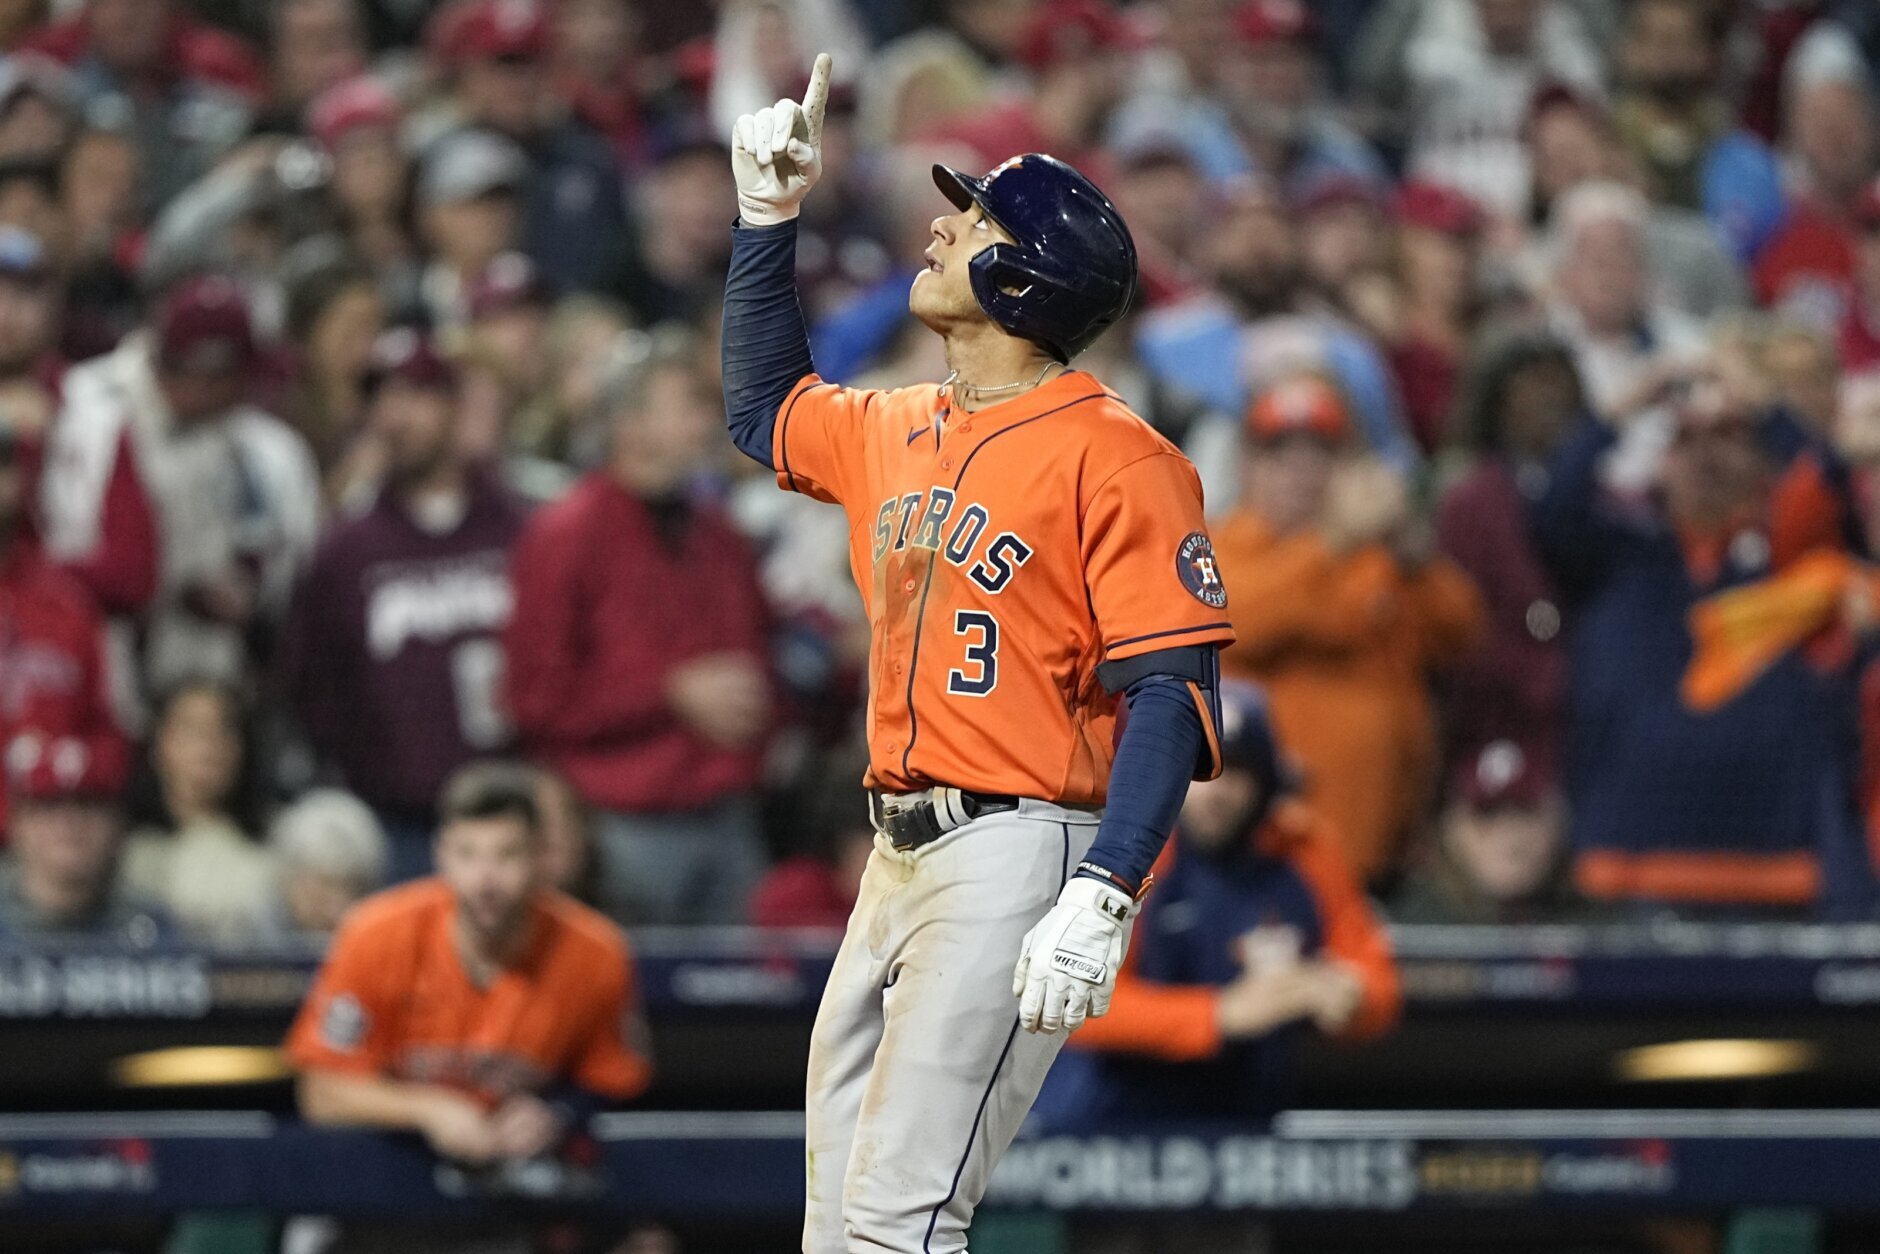 Houston Astros - Ten thousand fans will take home an orange Yuli Gurriel  replica jersey at next Friday's game! Get your tickets at astros.com/promotions.